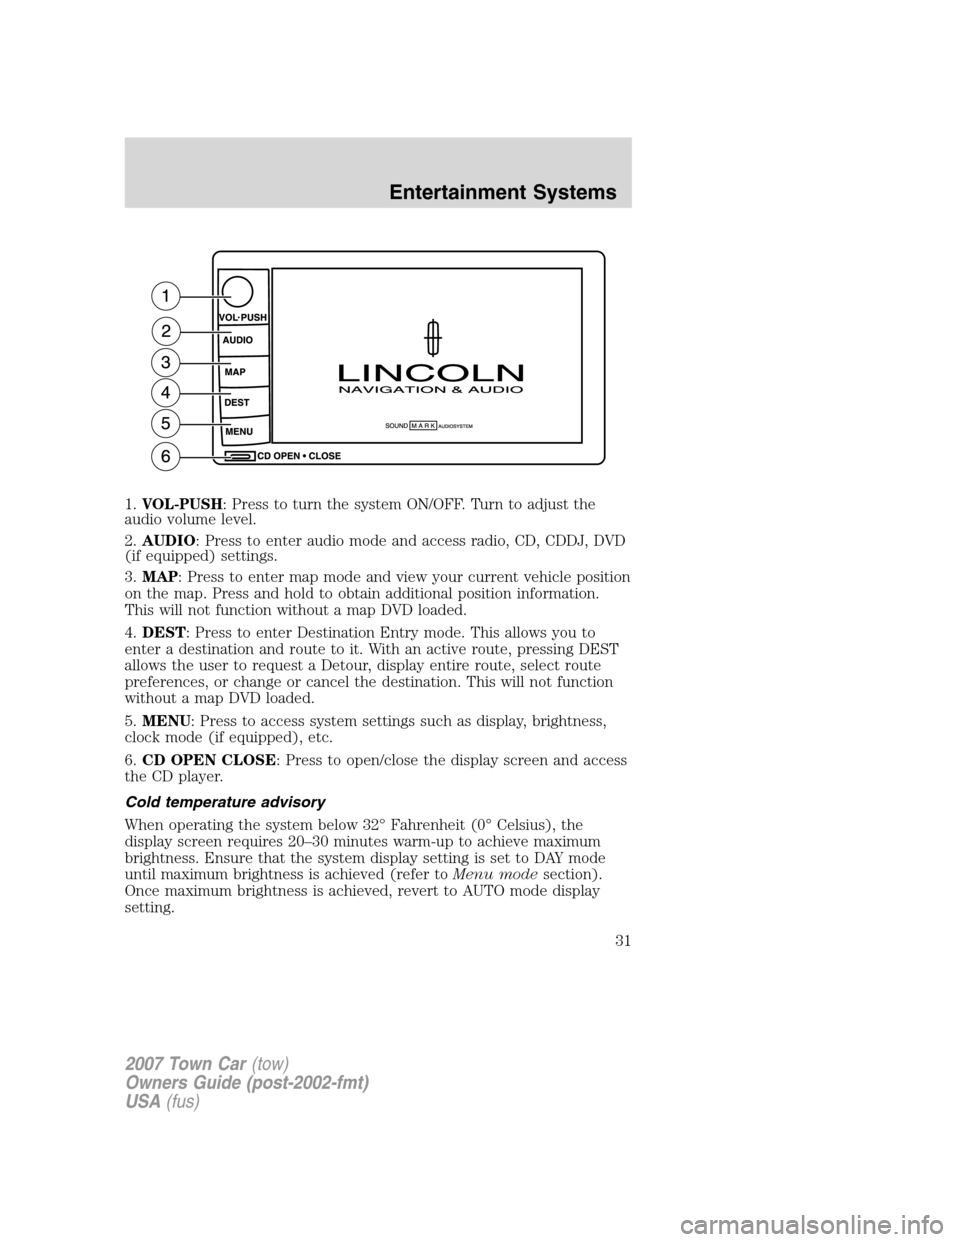 LINCOLN TOWN CAR 2007  Owners Manual 1.VOL-PUSH: Press to turn the system ON/OFF. Turn to adjust the
audio volume level.
2.AUDIO: Press to enter audio mode and access radio, CD, CDDJ, DVD
(if equipped) settings.
3.MAP: Press to enter map